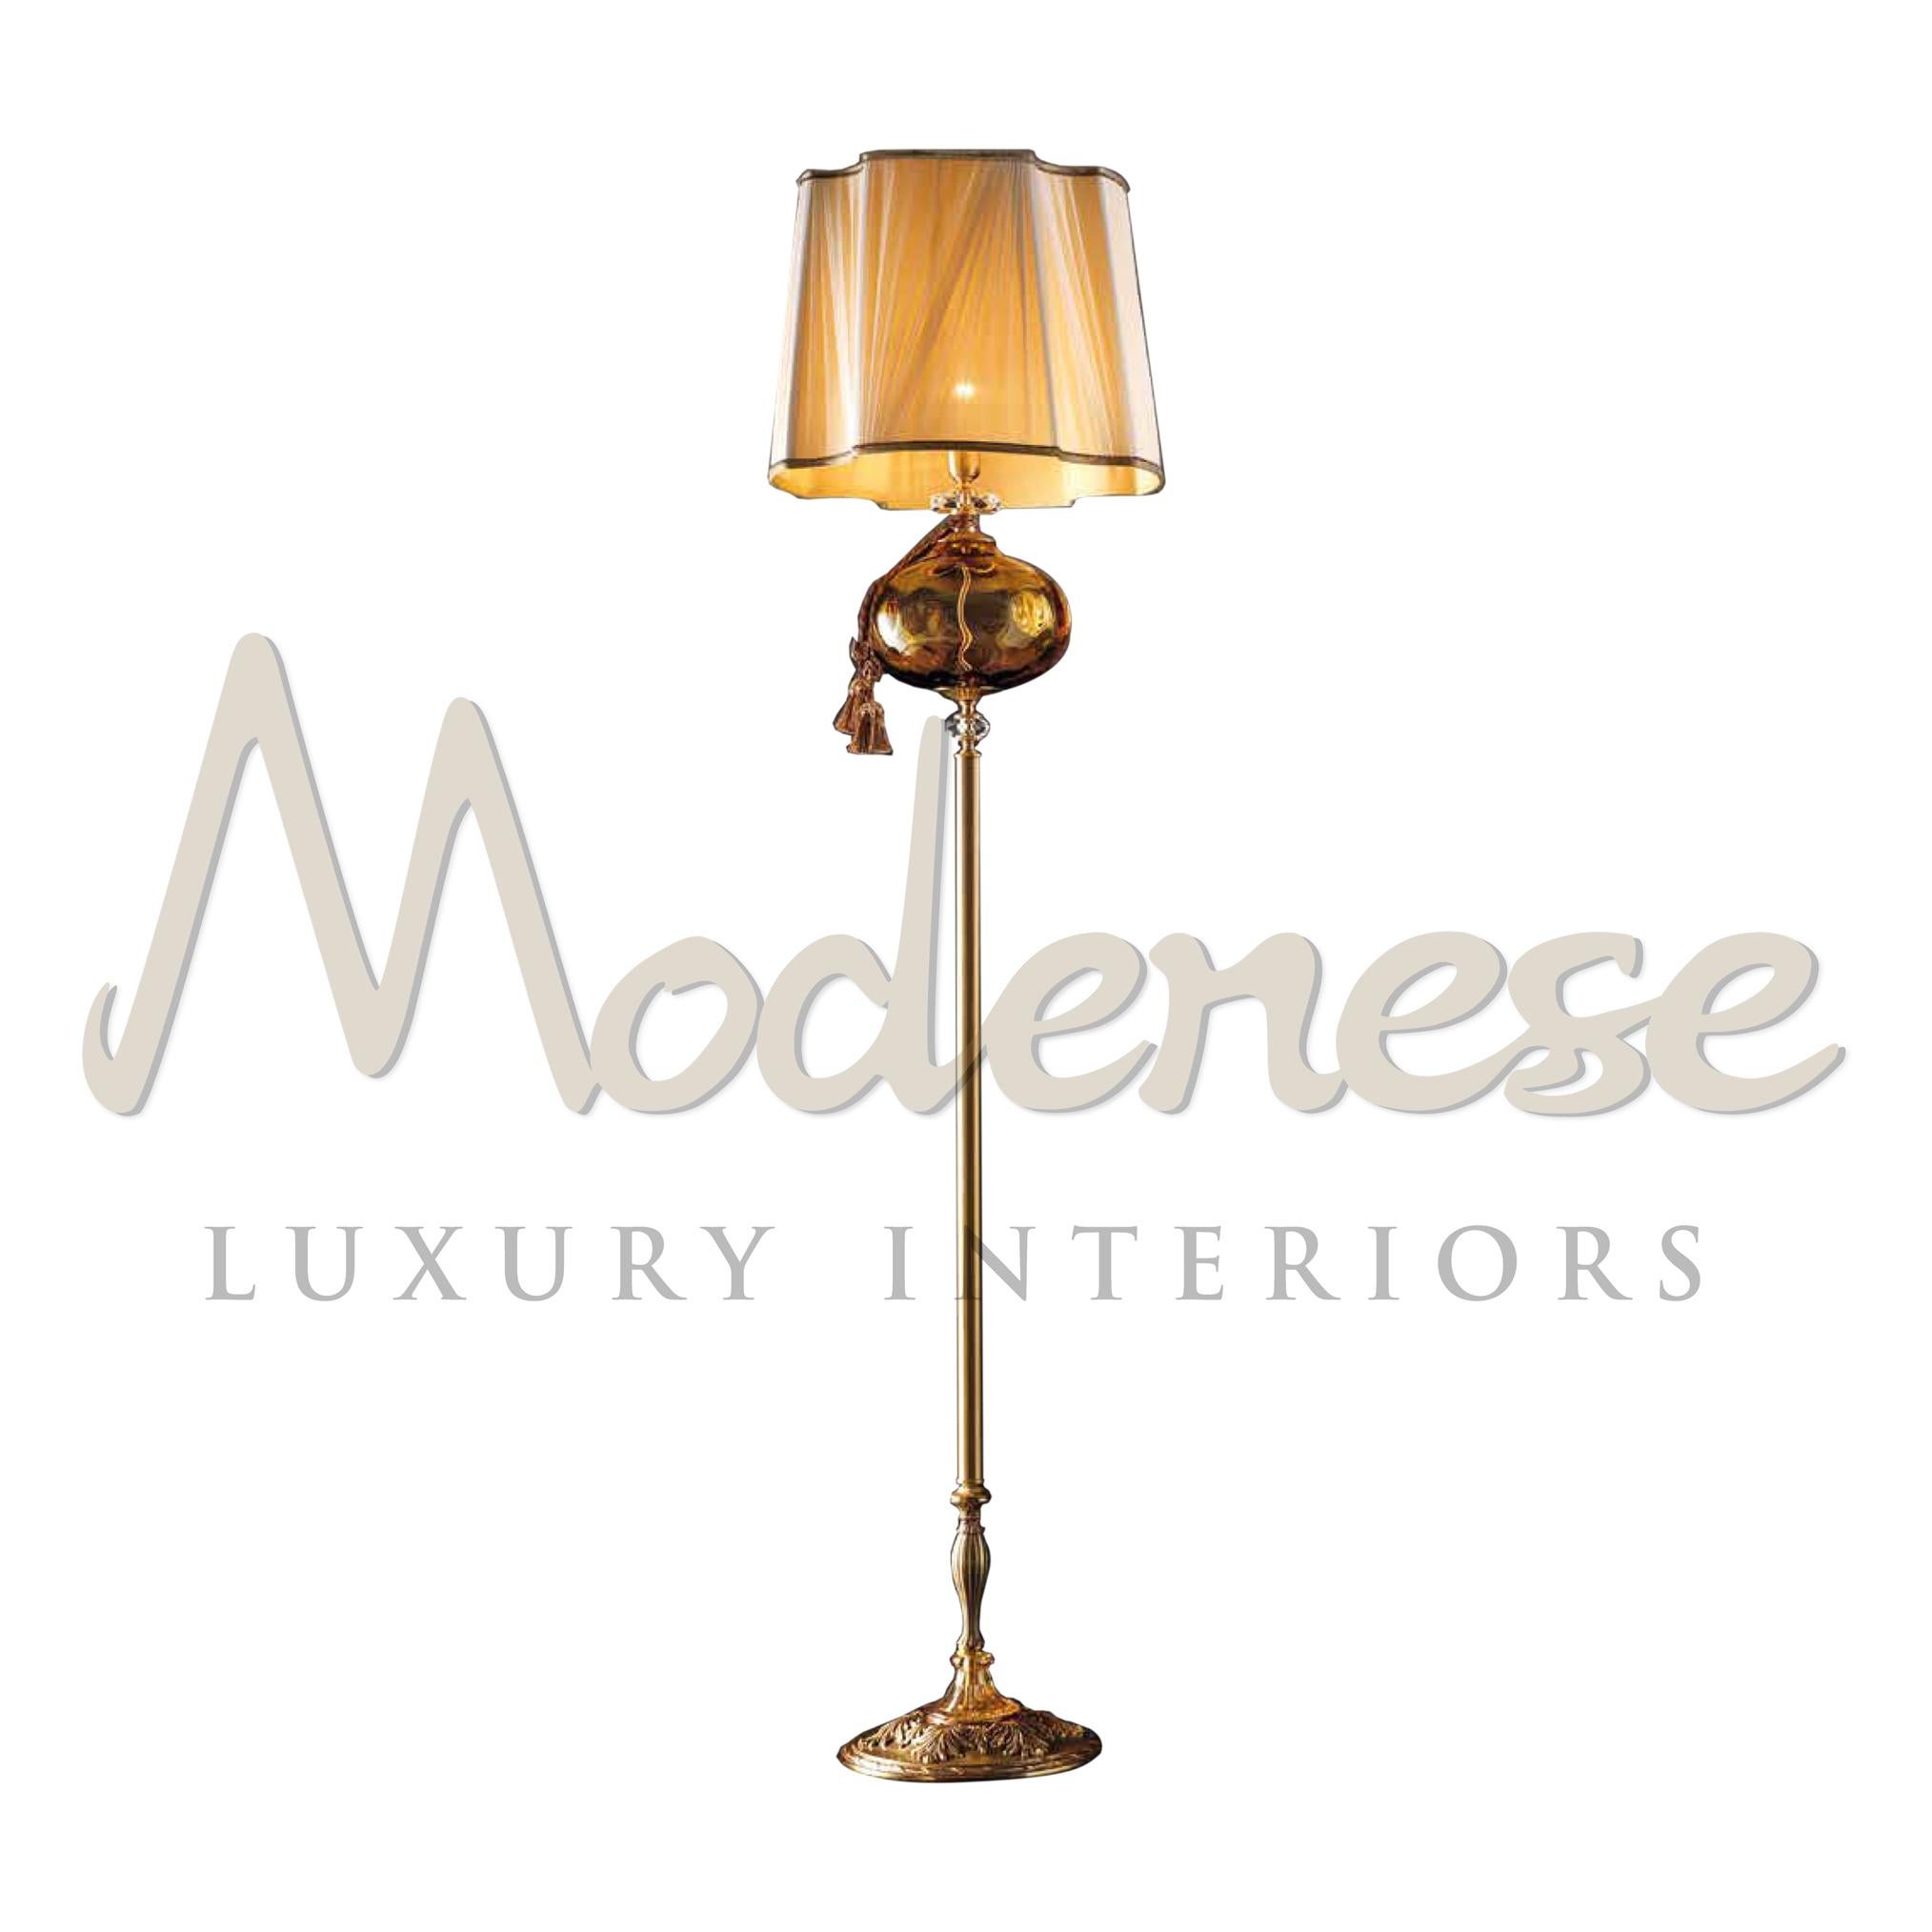 The proportional silhouette of the elements of different thicknesses, which are the frame for this line, is the hallmark of Modenese Gastone luxury Interiors fixtures. This piece presents itself as a one in a million: finished in french gold satin